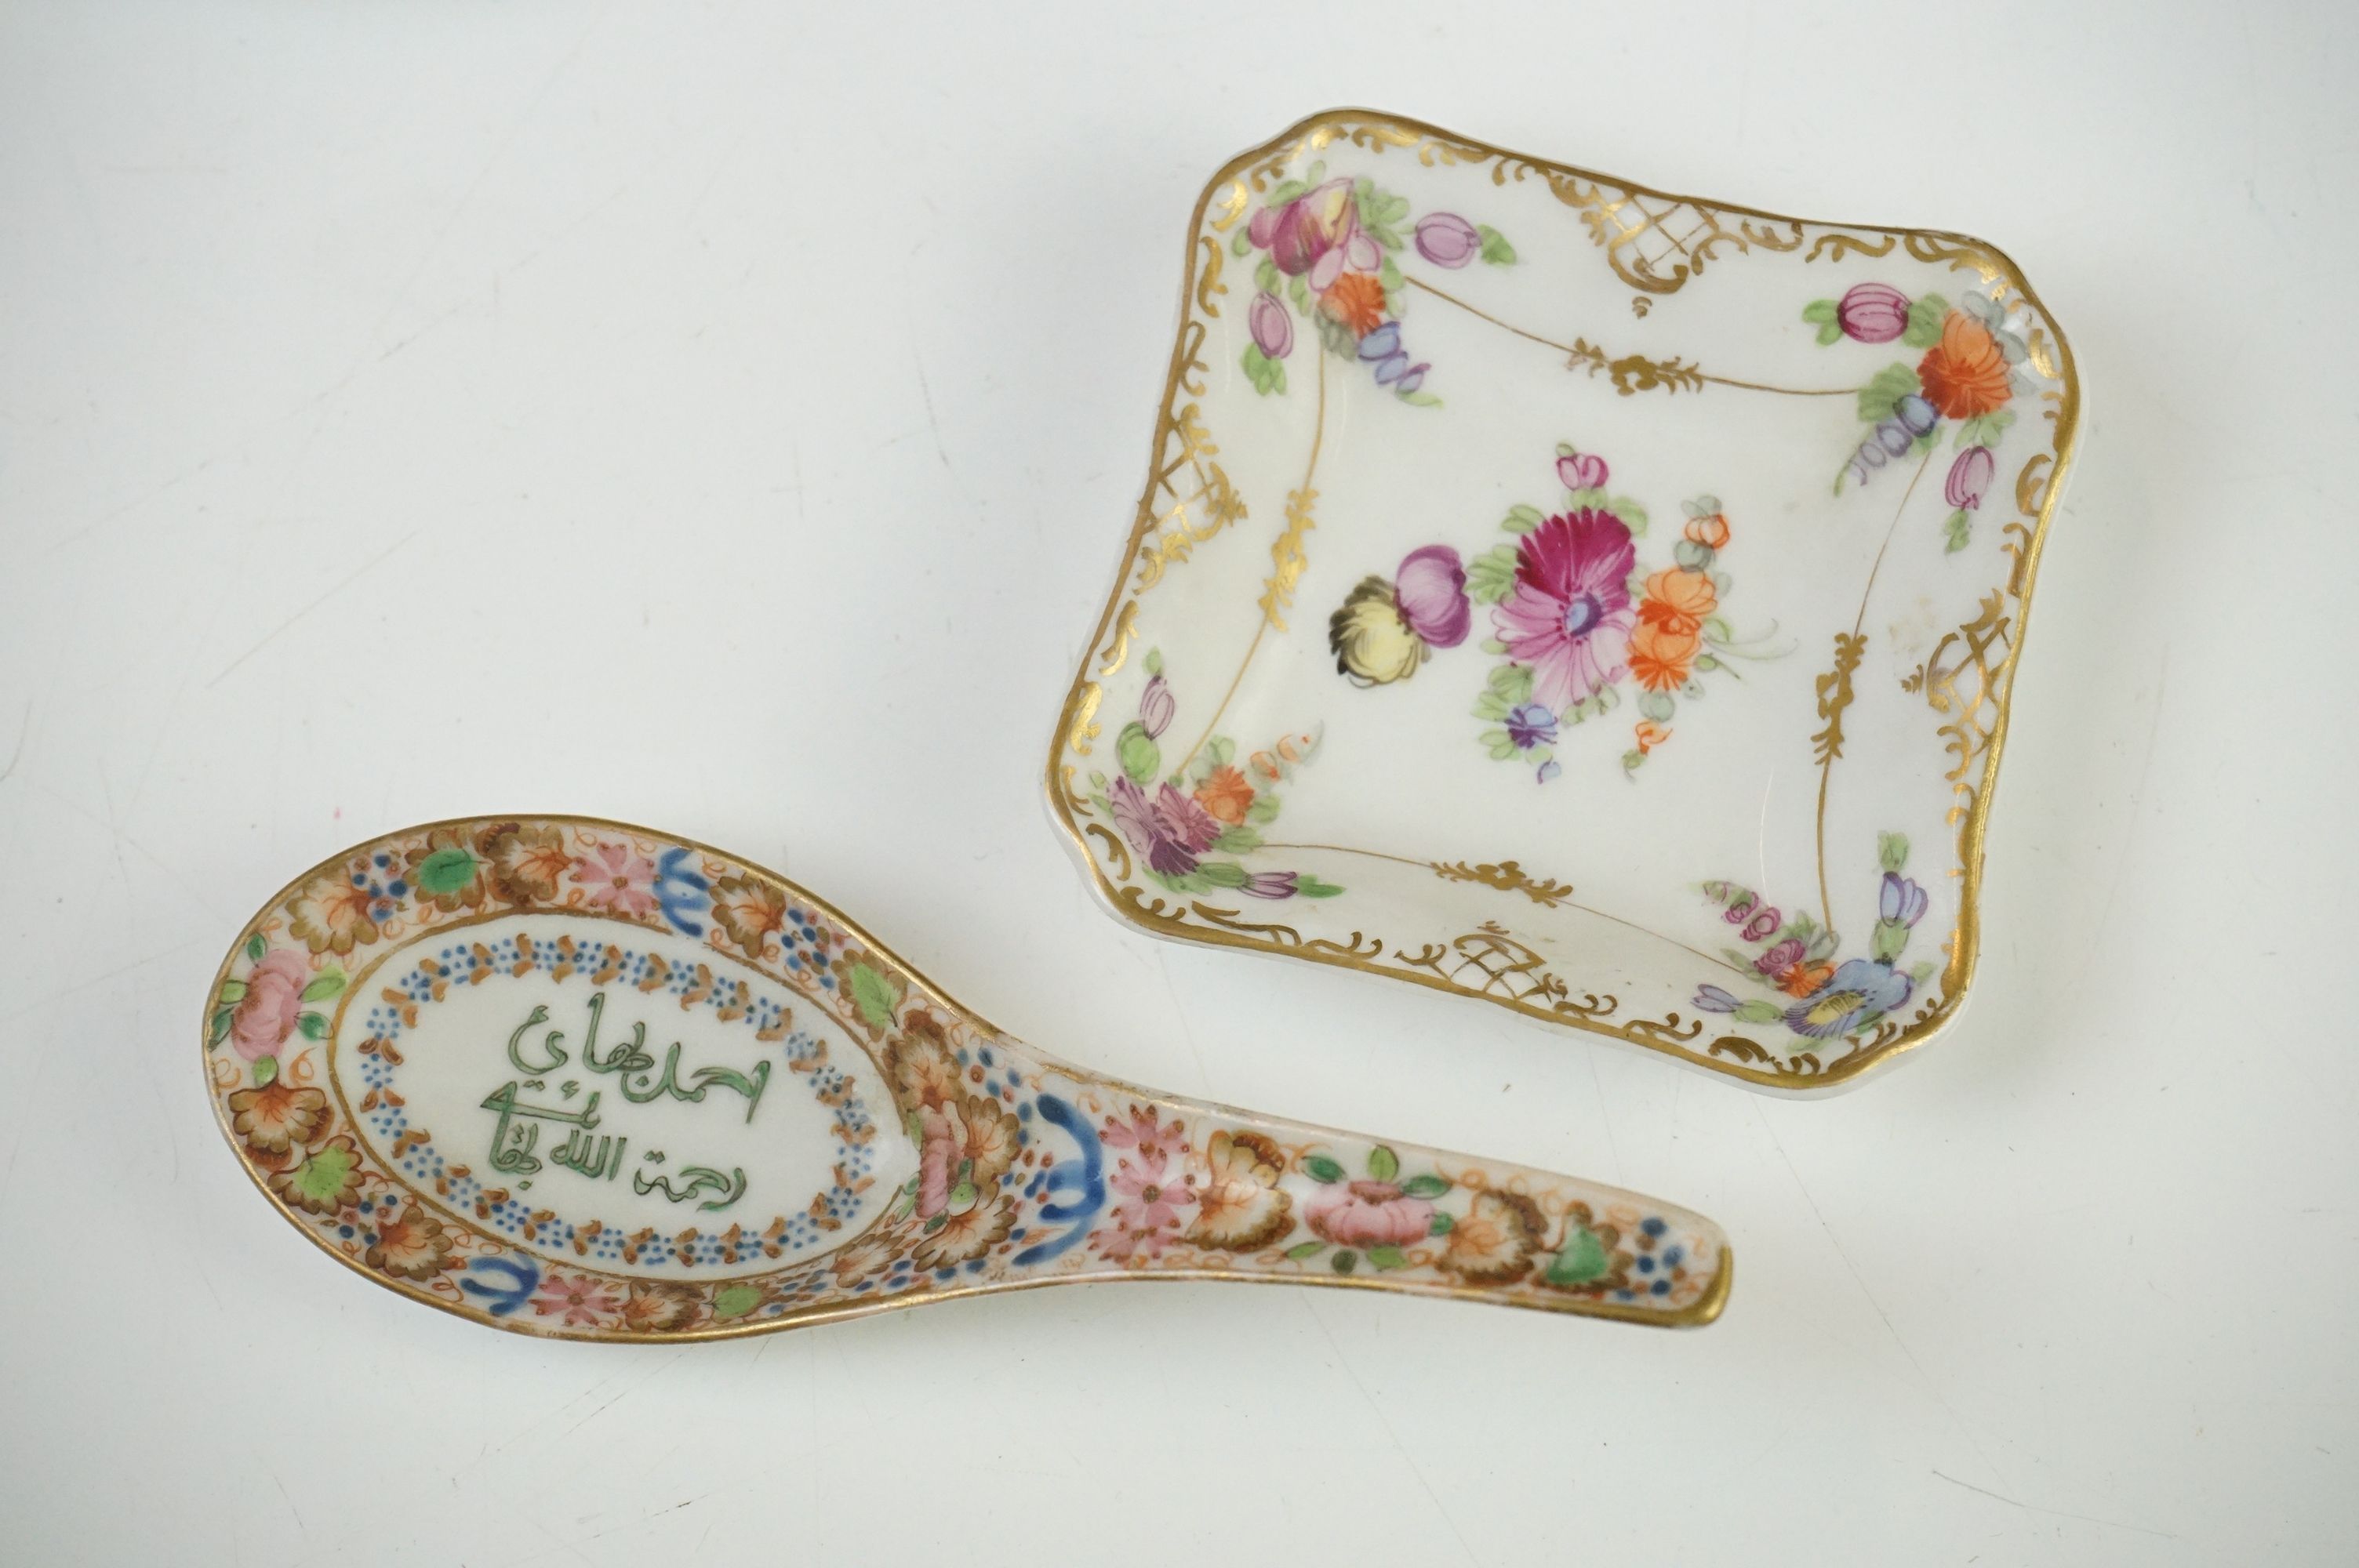 Pair of Continental Porcelain Cabinet Cups and Saucers decorated in gilt and enamels with flowers - Image 2 of 8